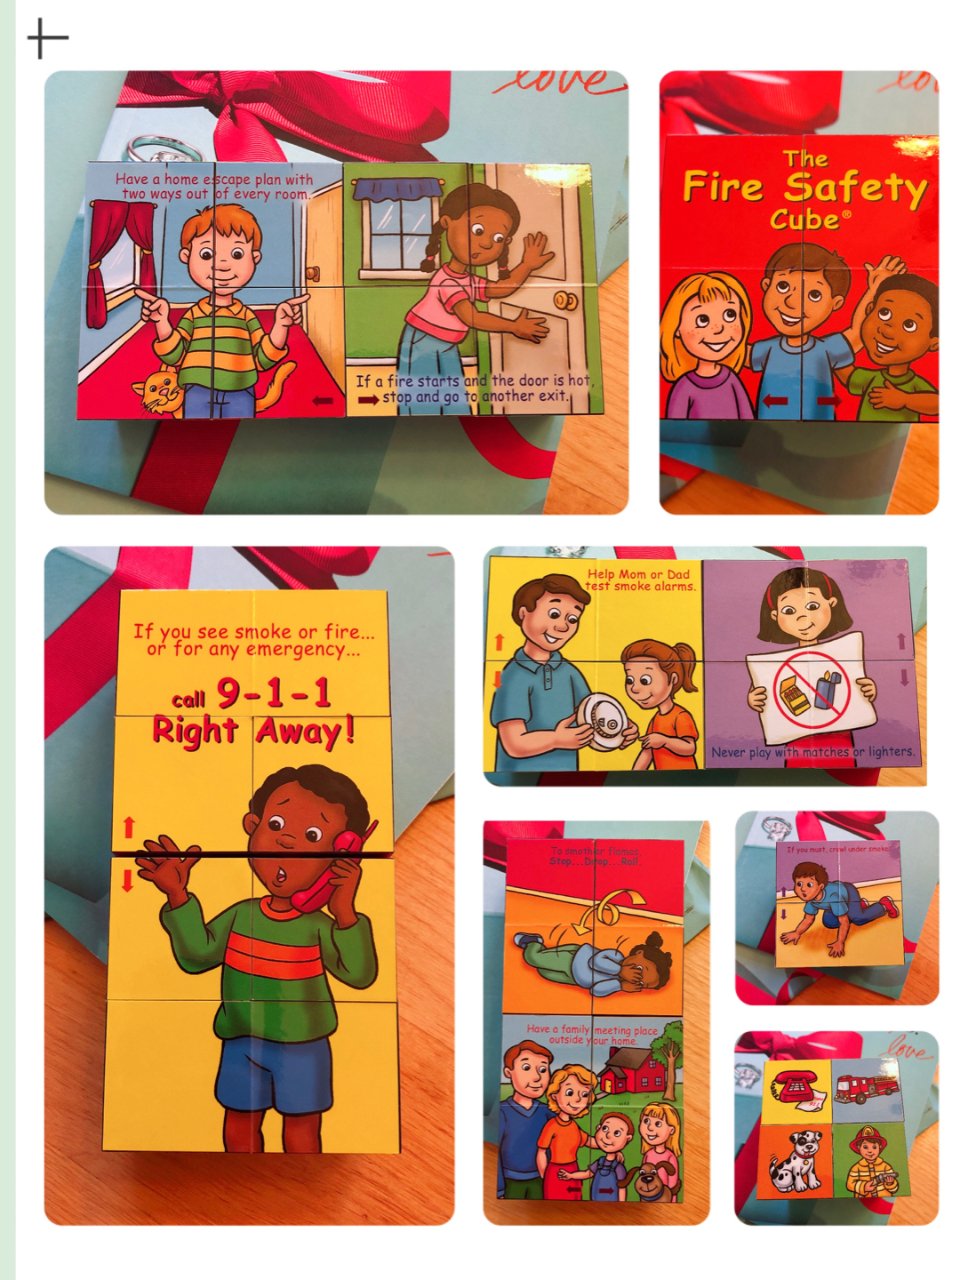 The fire safety cube